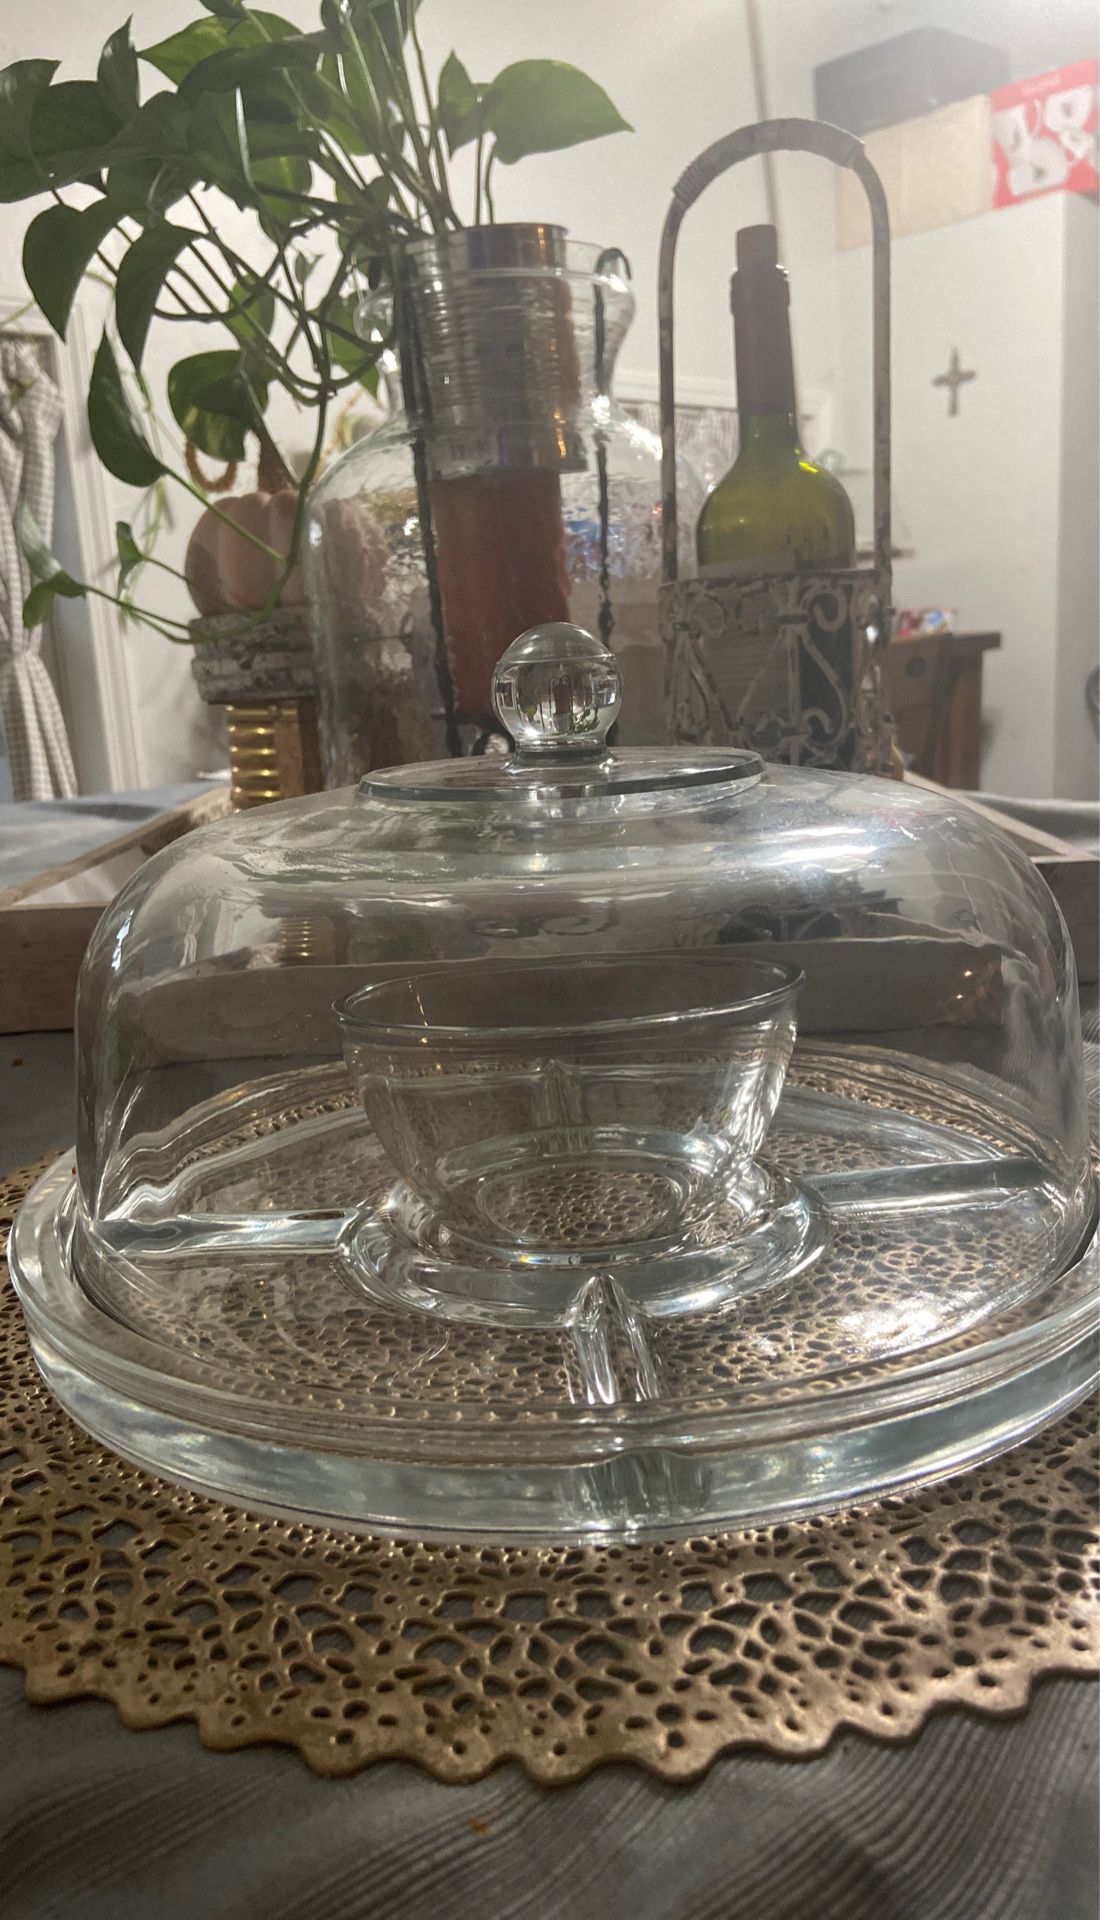 Glass cake plate/ platter and dipping bowl